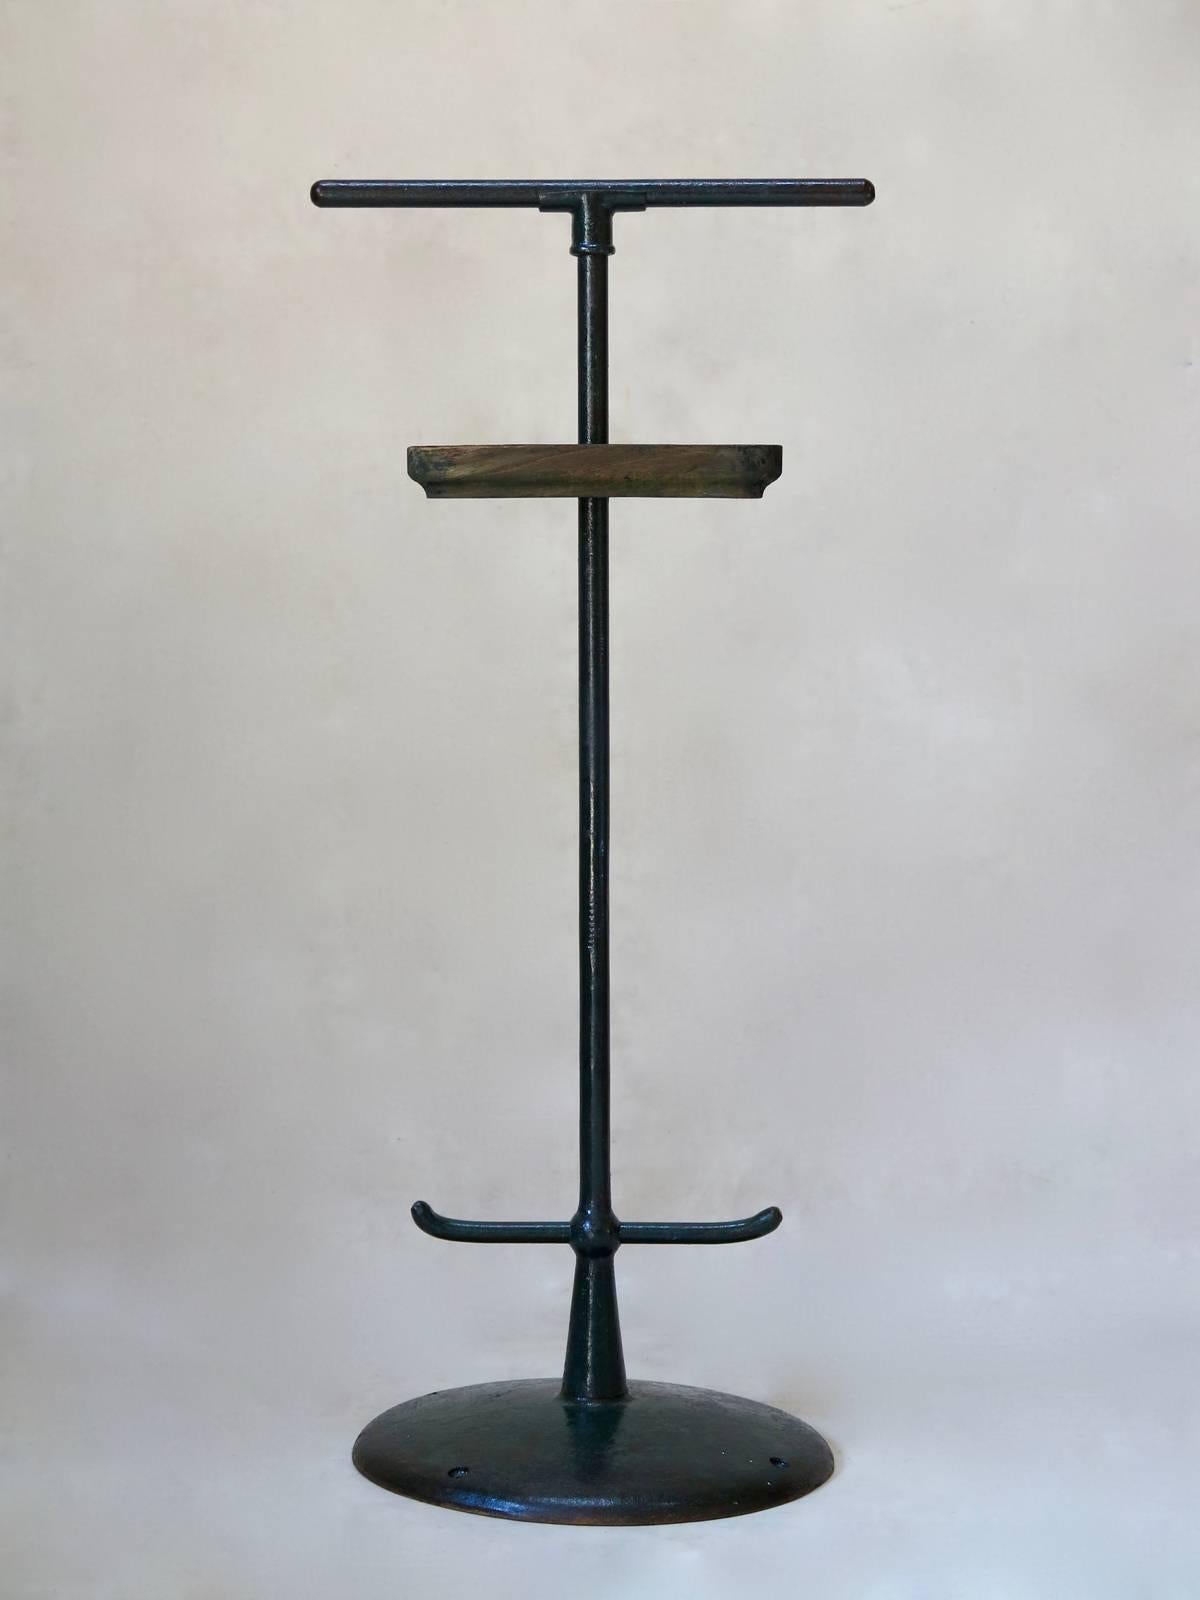 Chic pair of streamlined, cast-iron valet stands, with wooden vide-poches. The iron has a lovely textured feel and retains its original, dark green paint finish. The use of cast-iron, as well as the four holes around the base to fix the pieces to